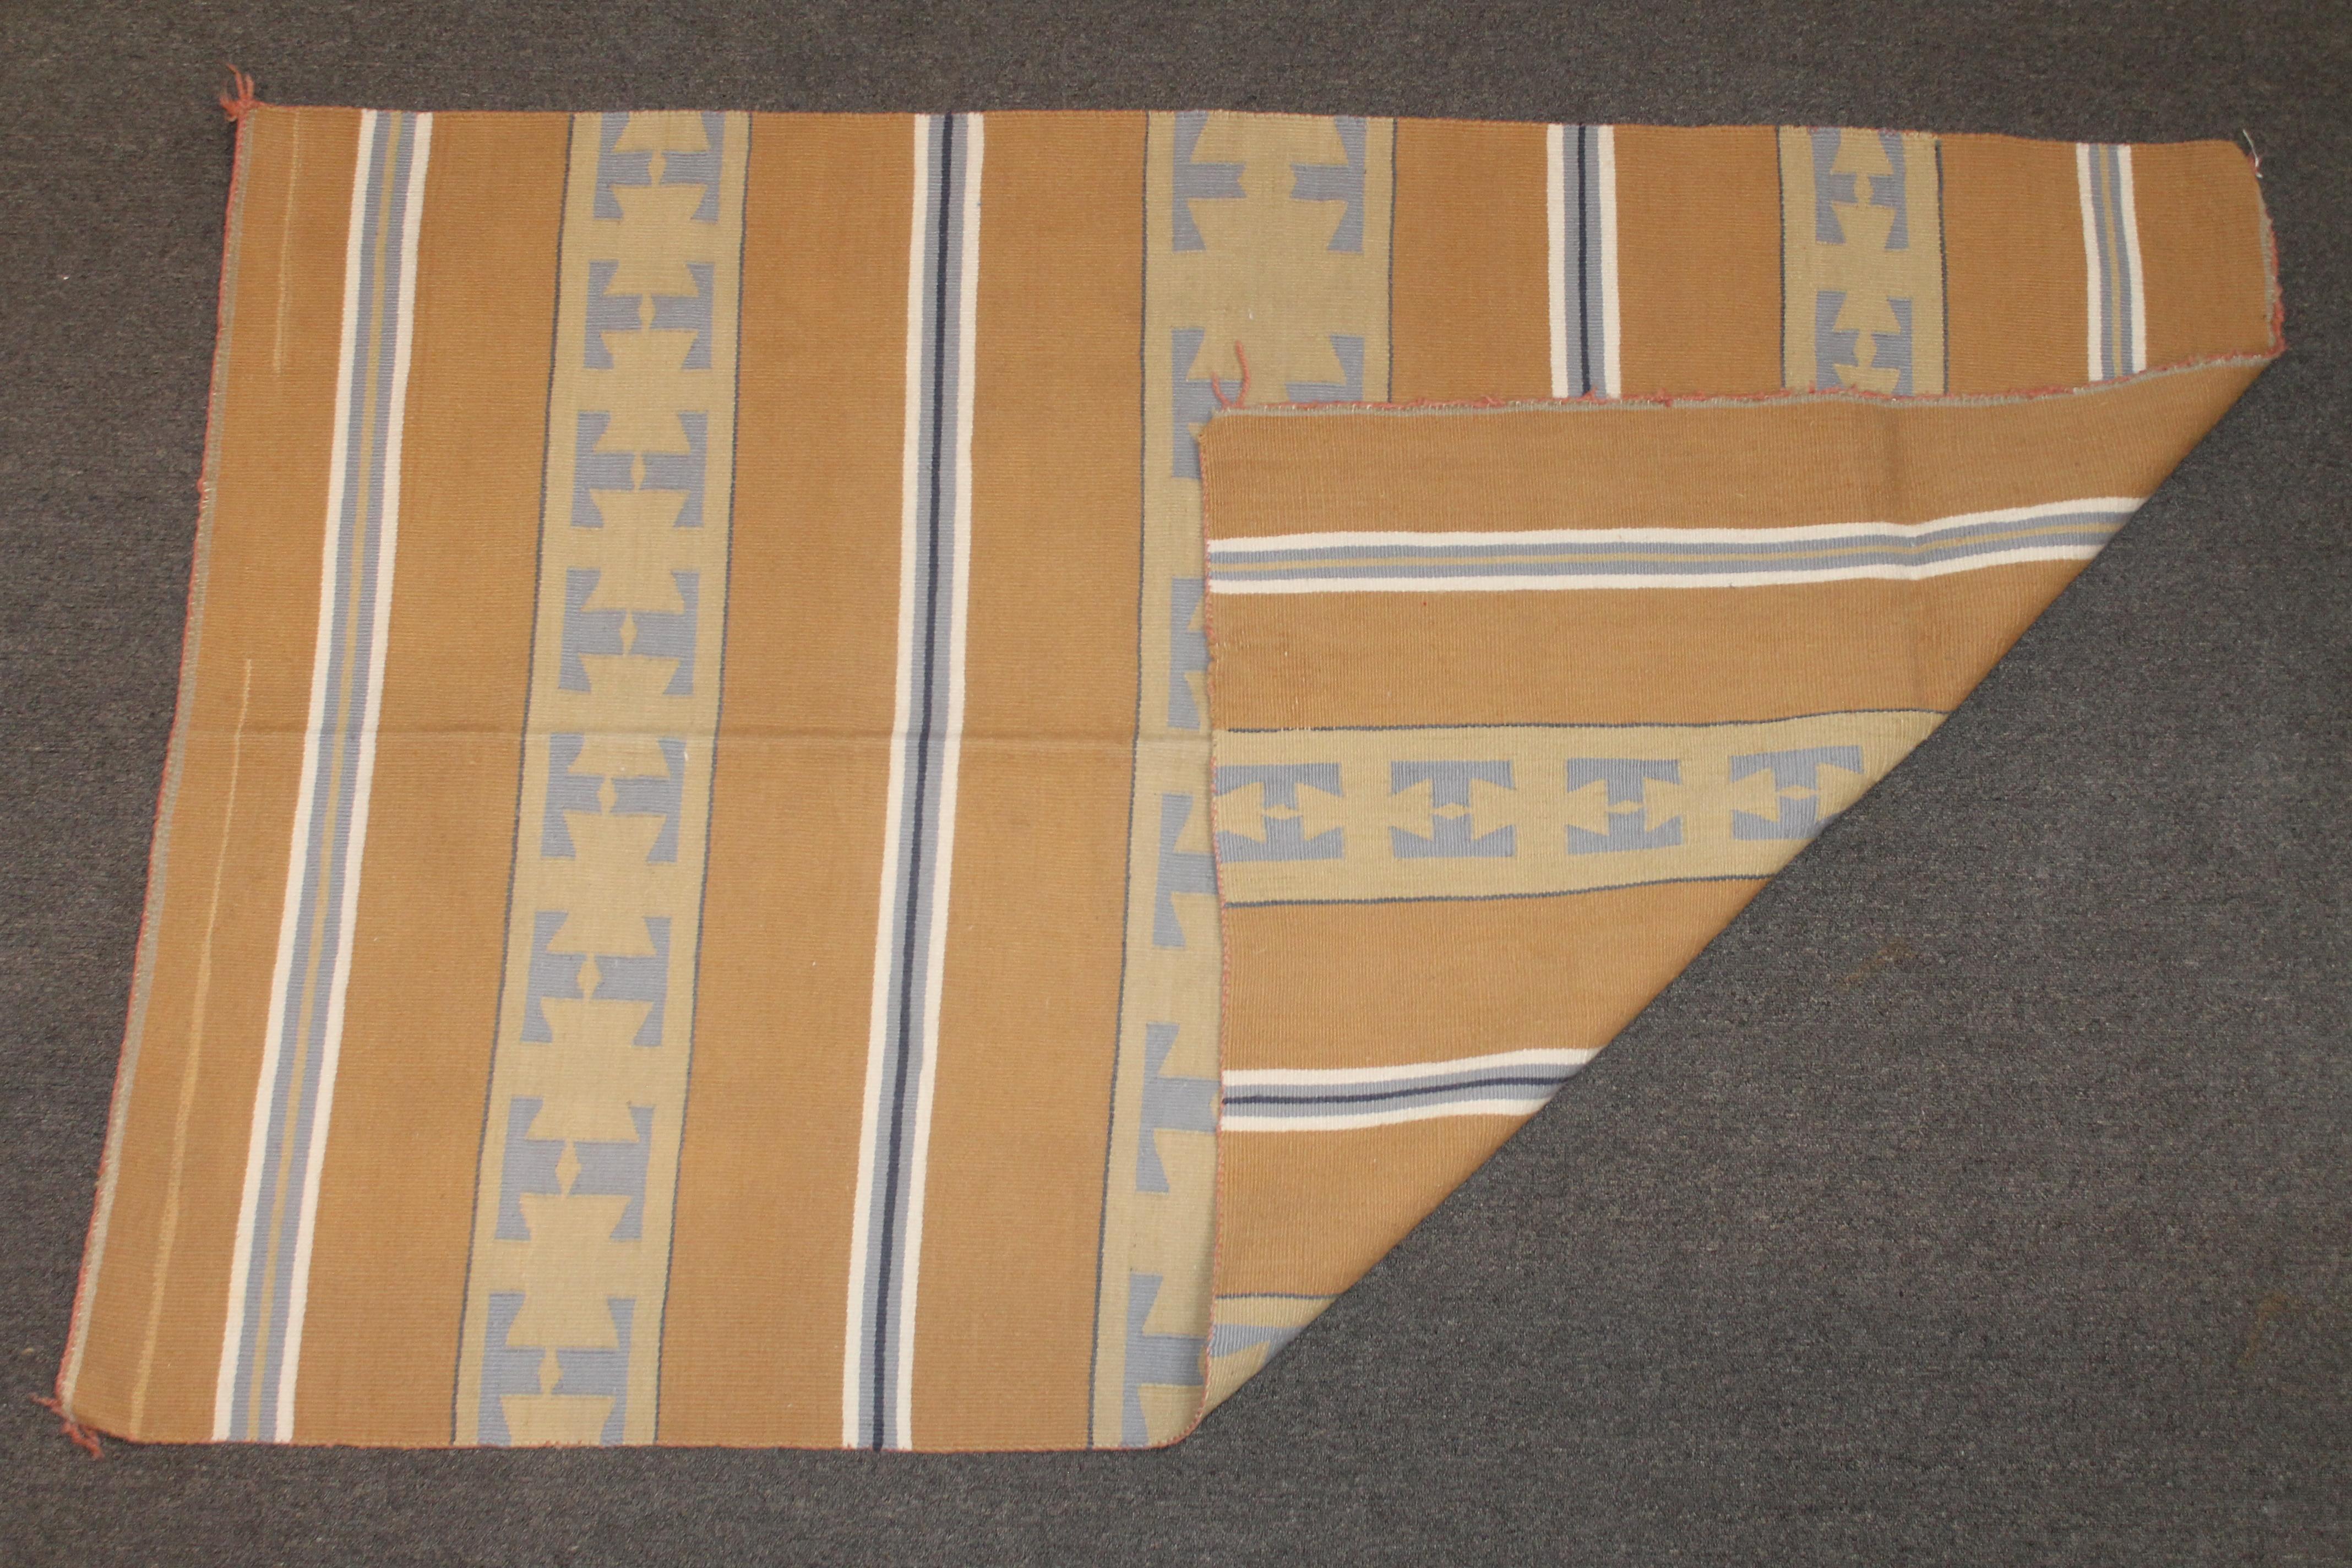 This Navajo Indian weaving from the Chinle Arizona Indians is in fine condition. Minor wear on one edge but not noticeable to the naked eye. This large area rug is simple yet rich mustard colors.